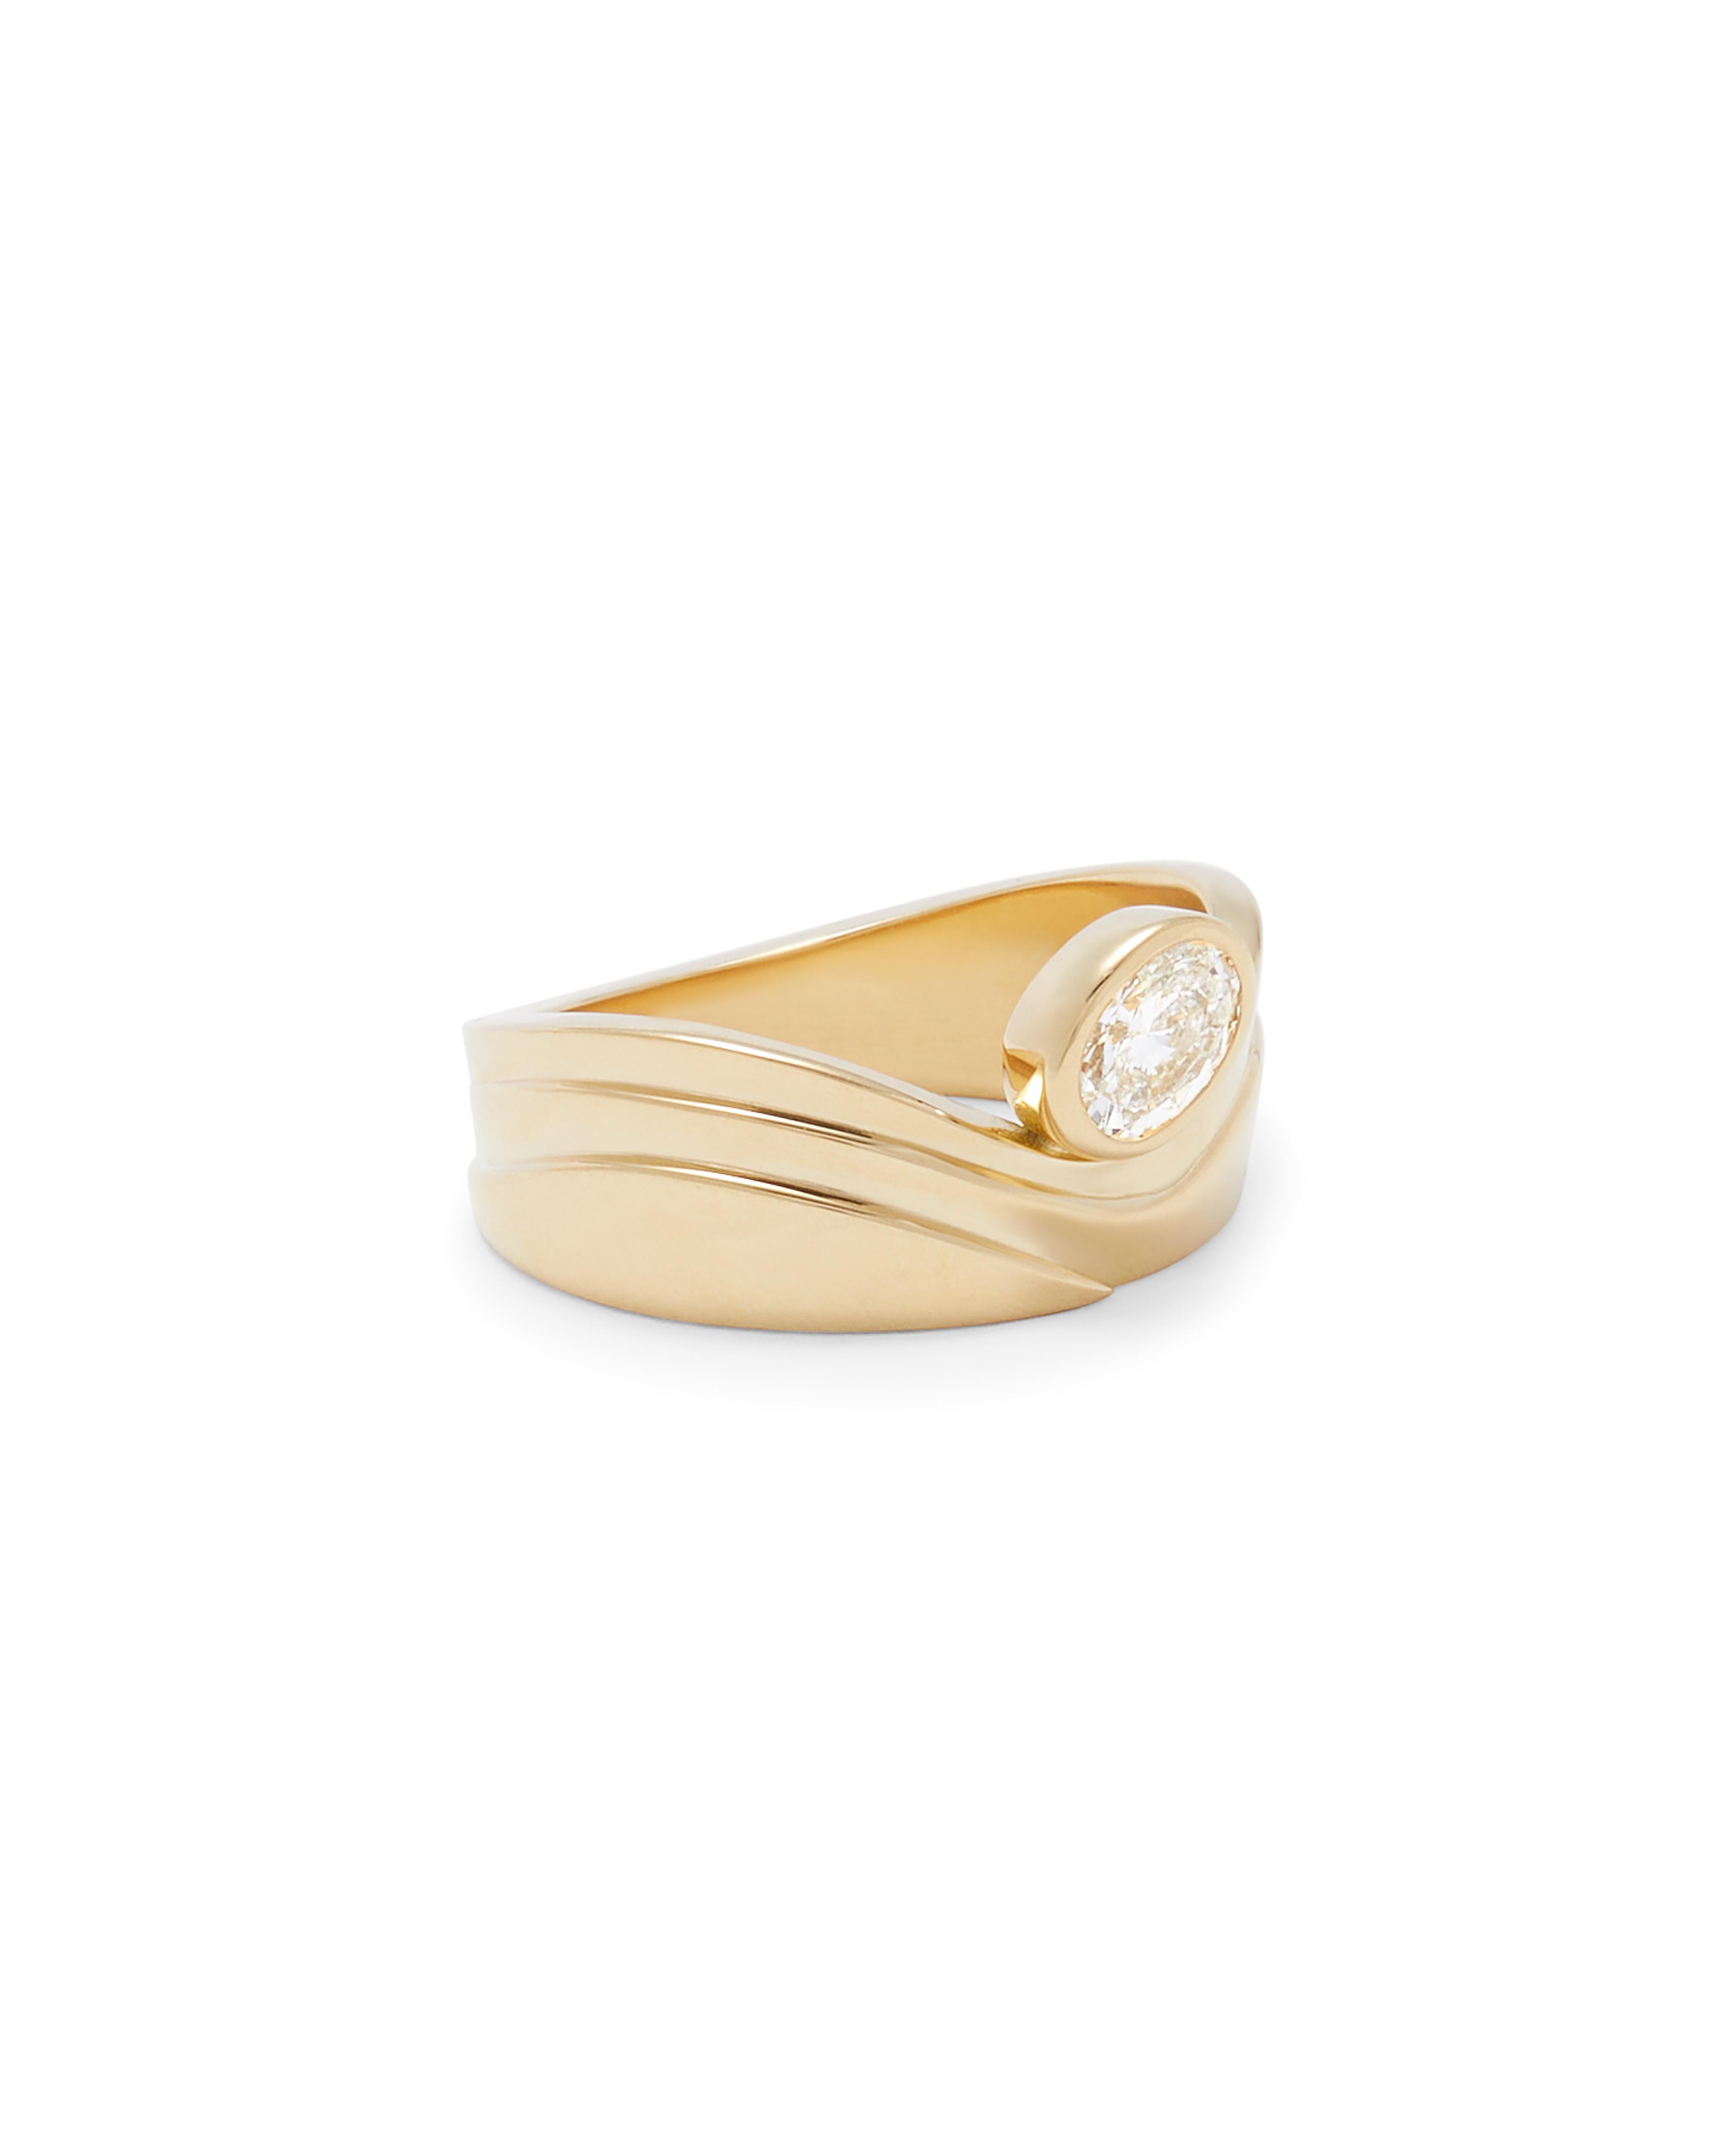 This sculptural gold ring made is made from 18k yellow gold and features a modern tiered design on the band. The flowing curved designed is accentuated with a bezel set .5 carat brilliant cut oval diamond. The stone shape and size can be customized. 